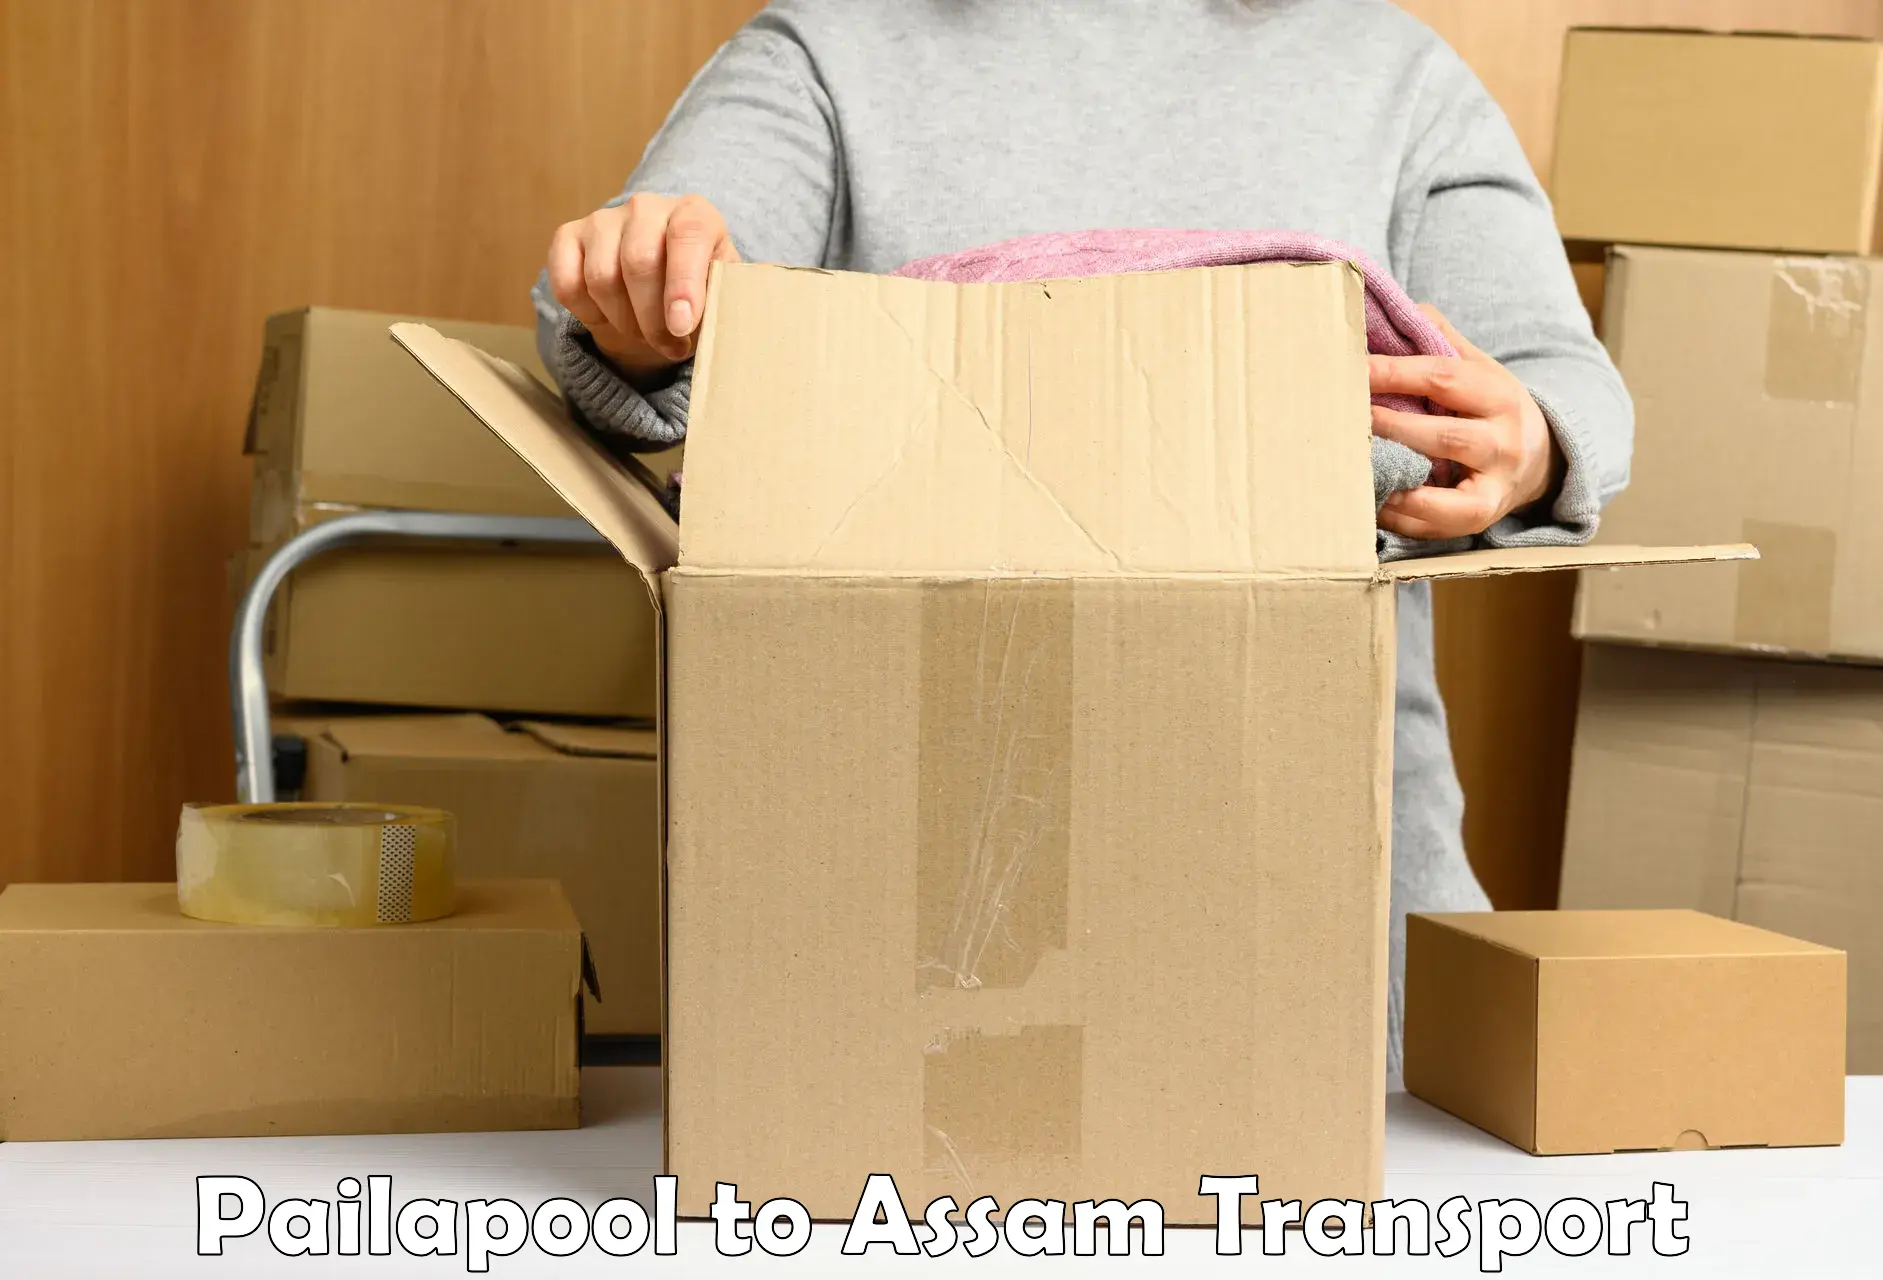 Interstate transport services Pailapool to Assam